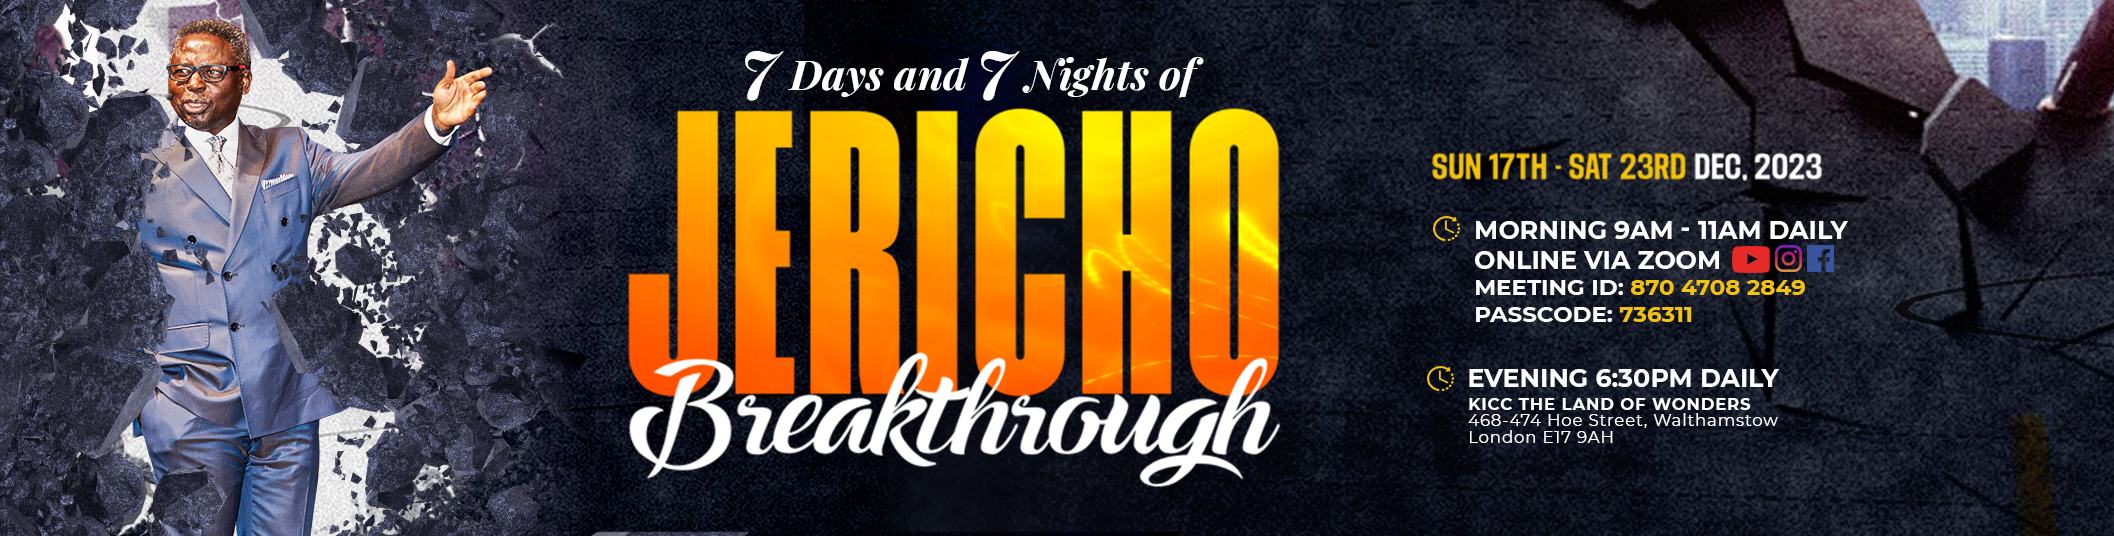 7 Days and 7 Nights - Jericho Breakthrough